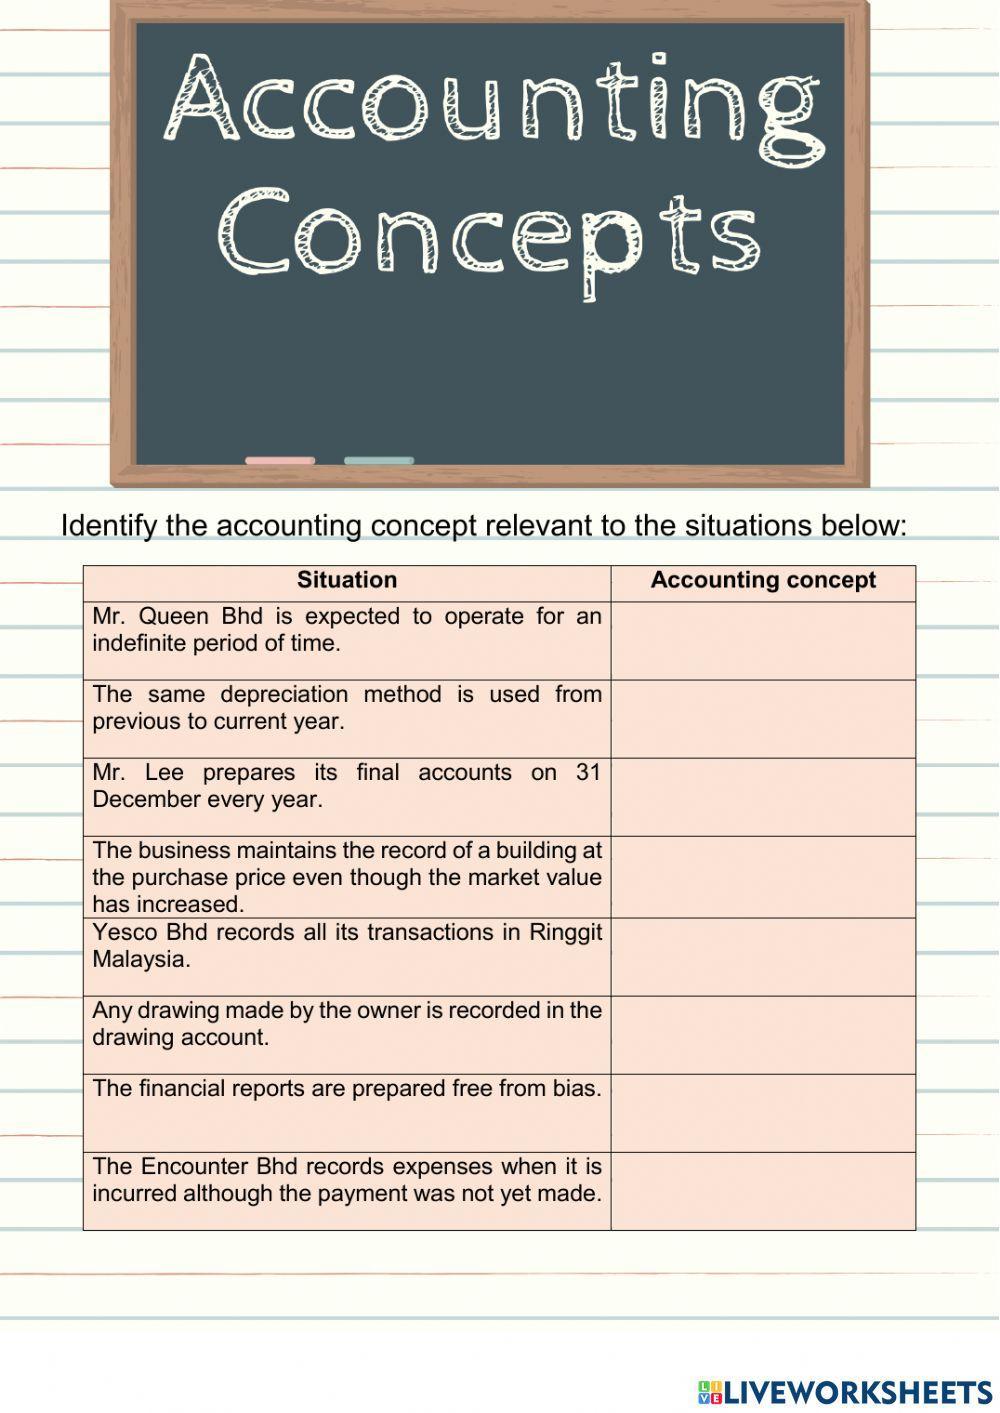 Chapter 2 - Accounting Concepts